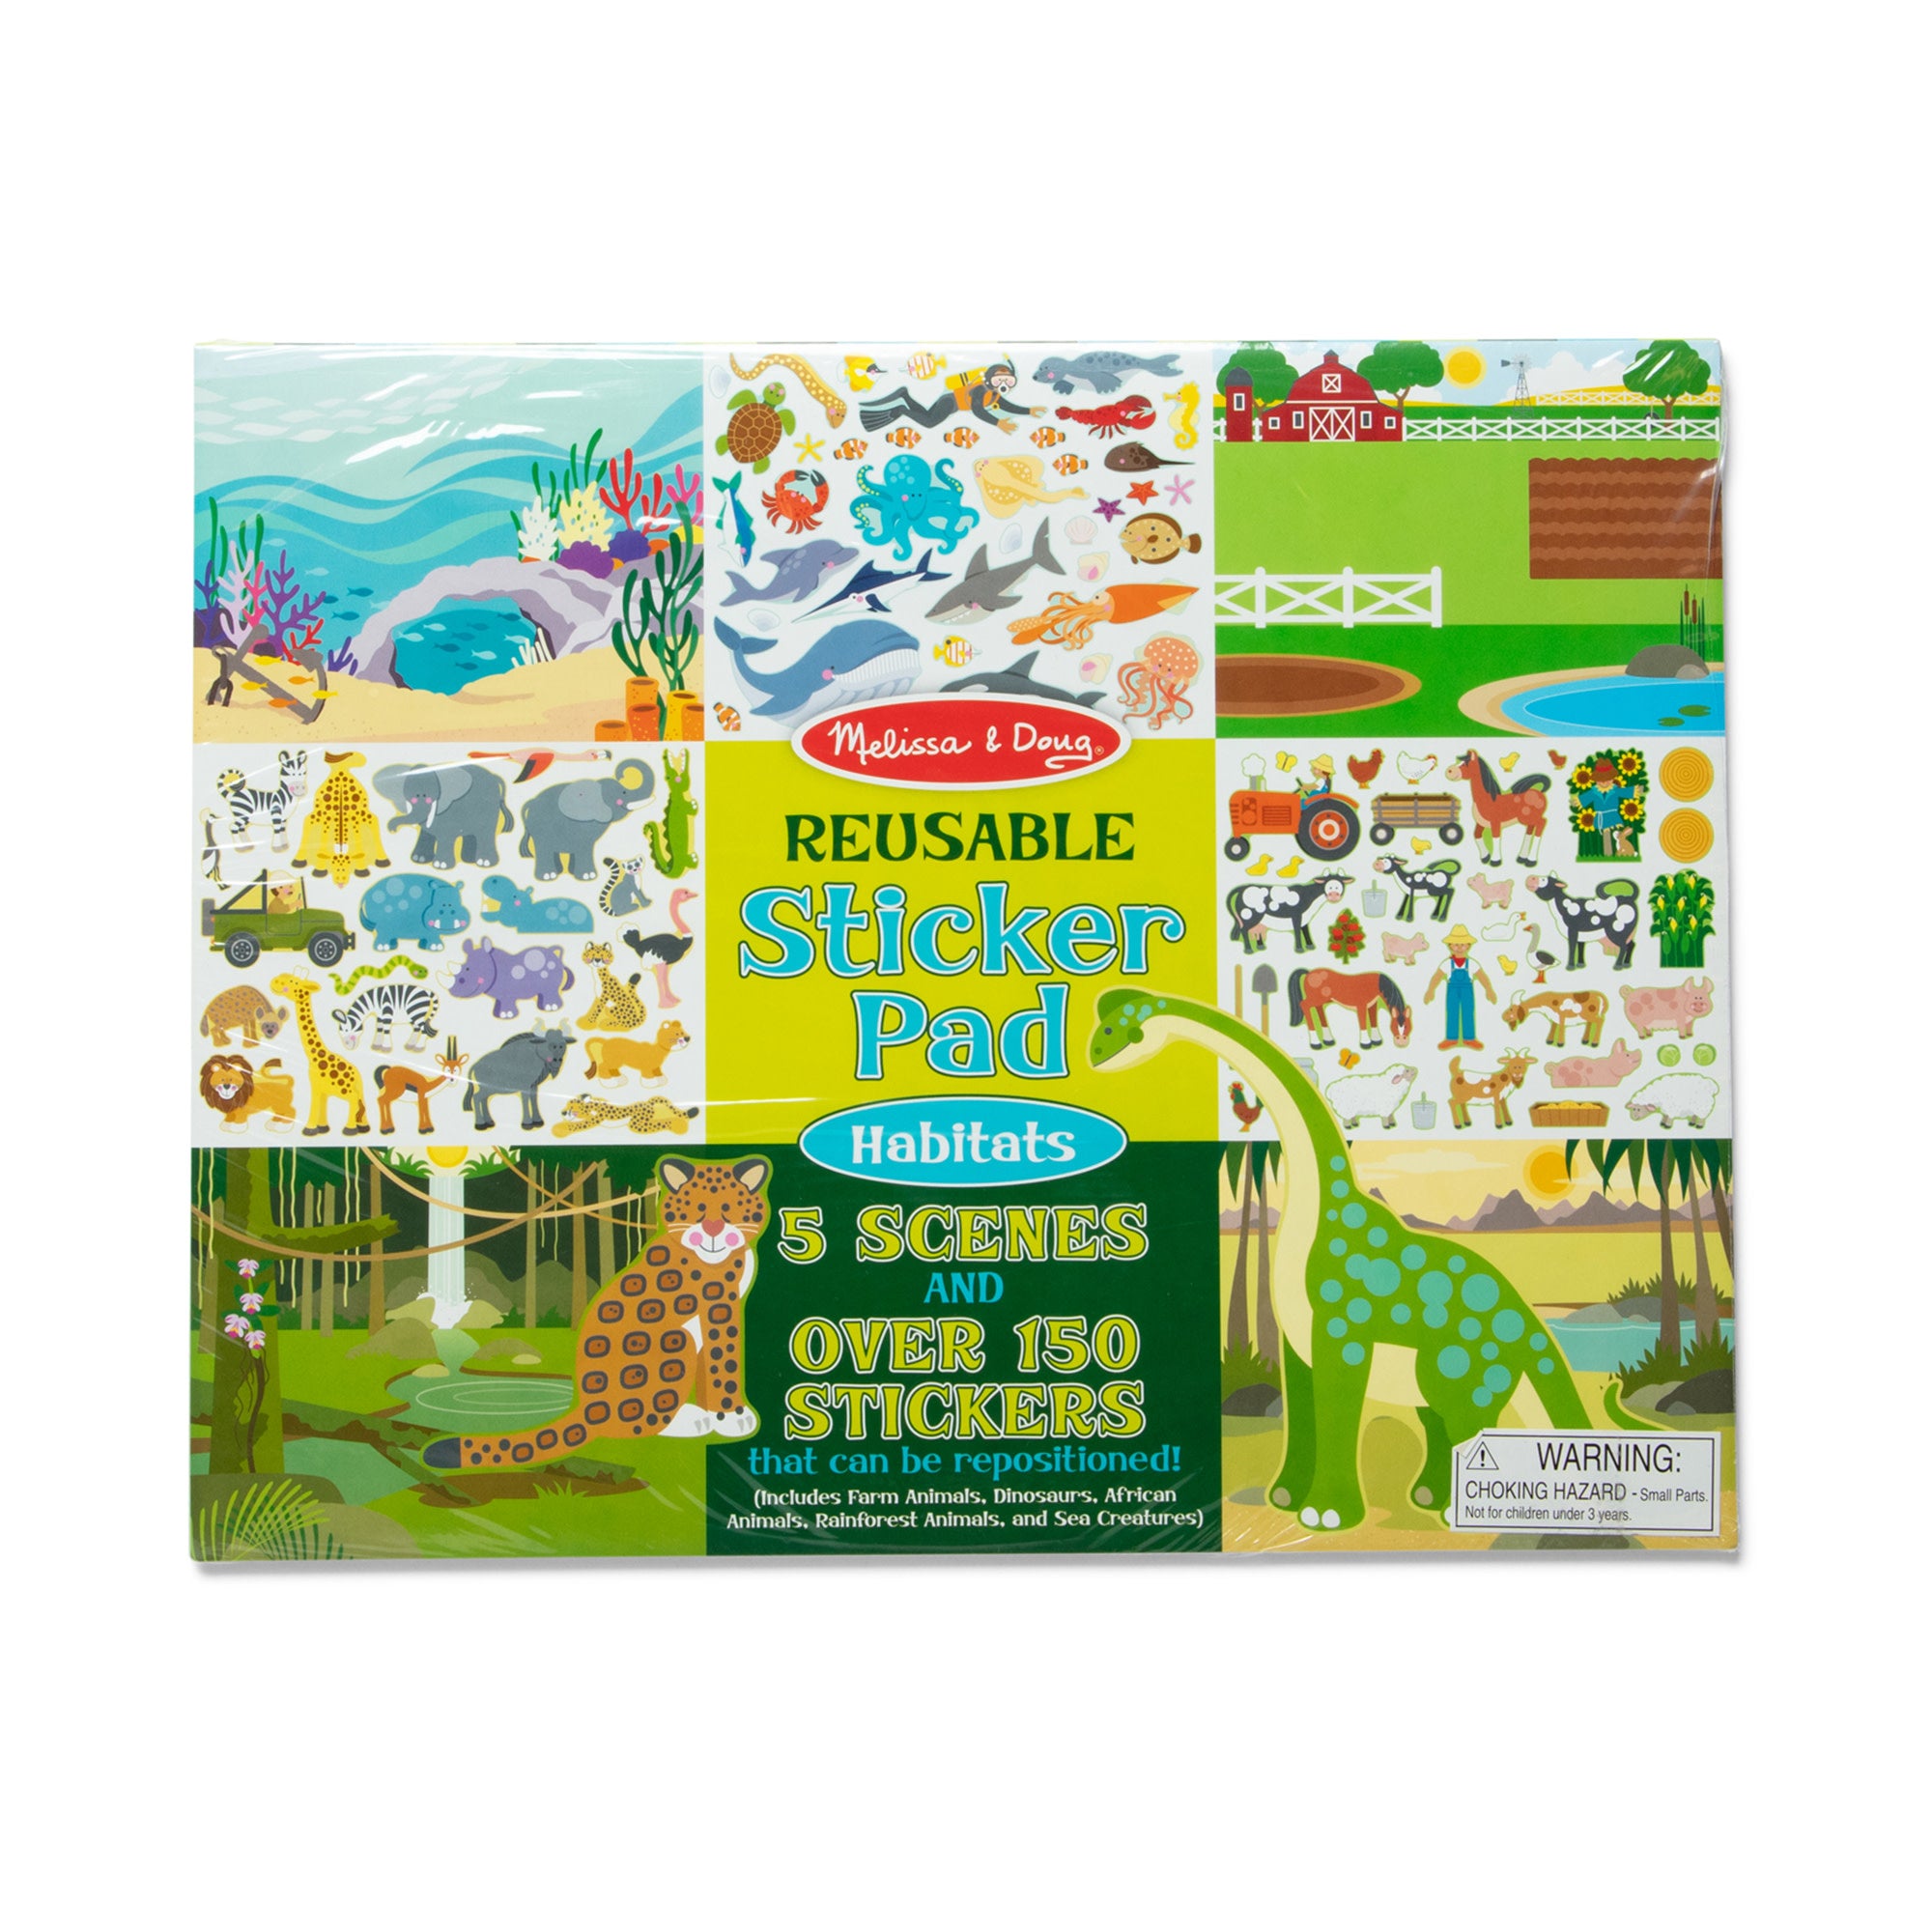 REUSABLE STICKER PAD - THE TOY STORE